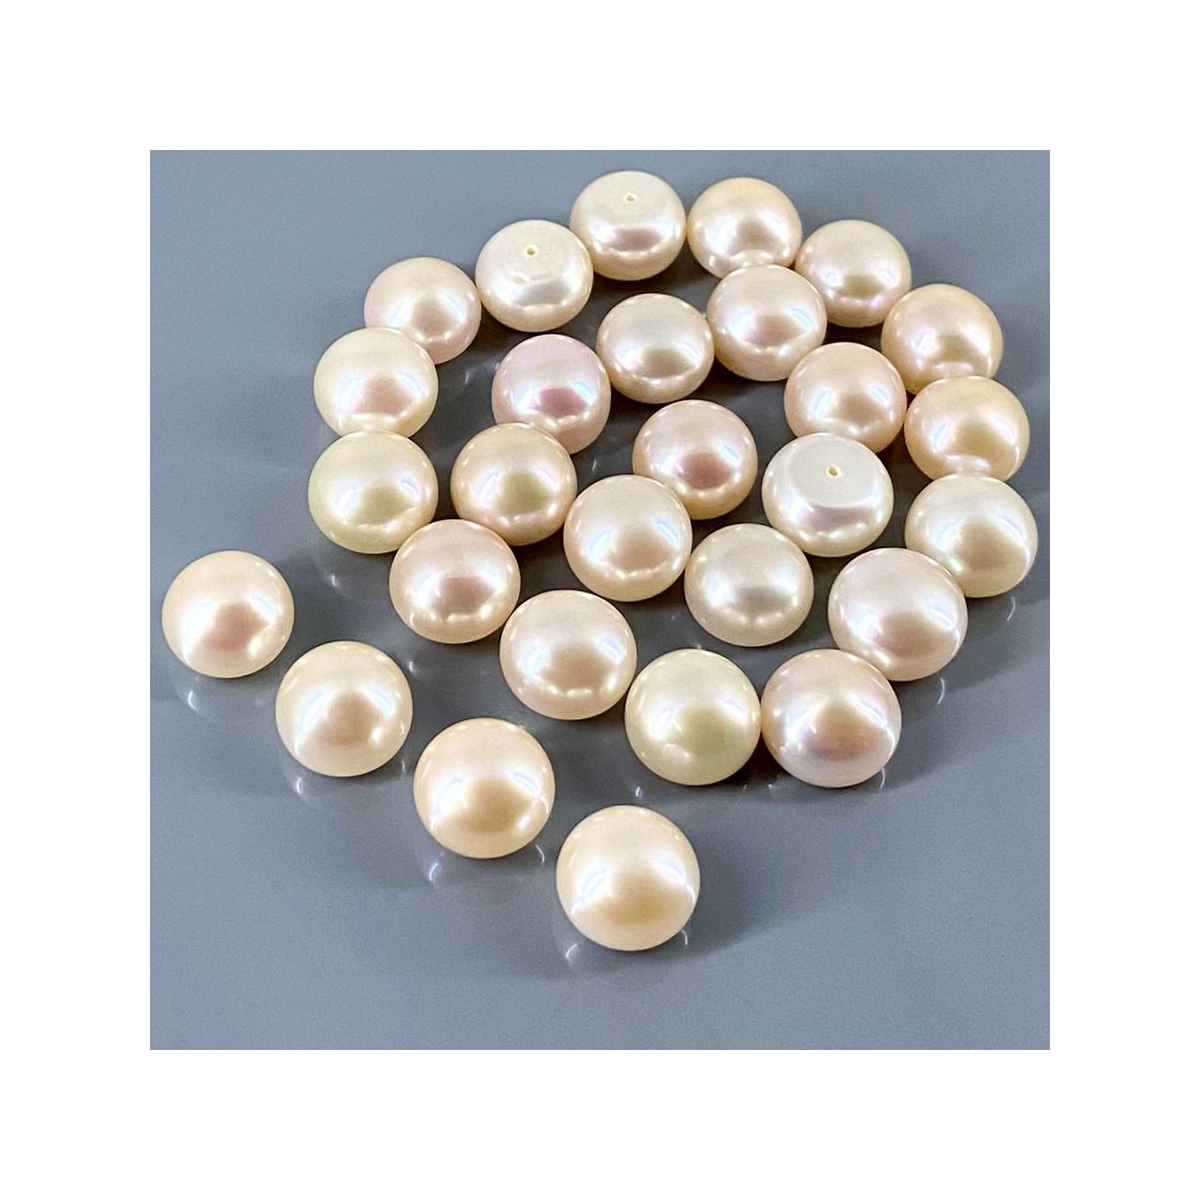 8-8.5 Mm AAA Gray Semi-round Freshwater Pearls Genuine Smooth and Round Pearl  Beads High Luster Pinkish Gray Color Freshwater Pearls 535 